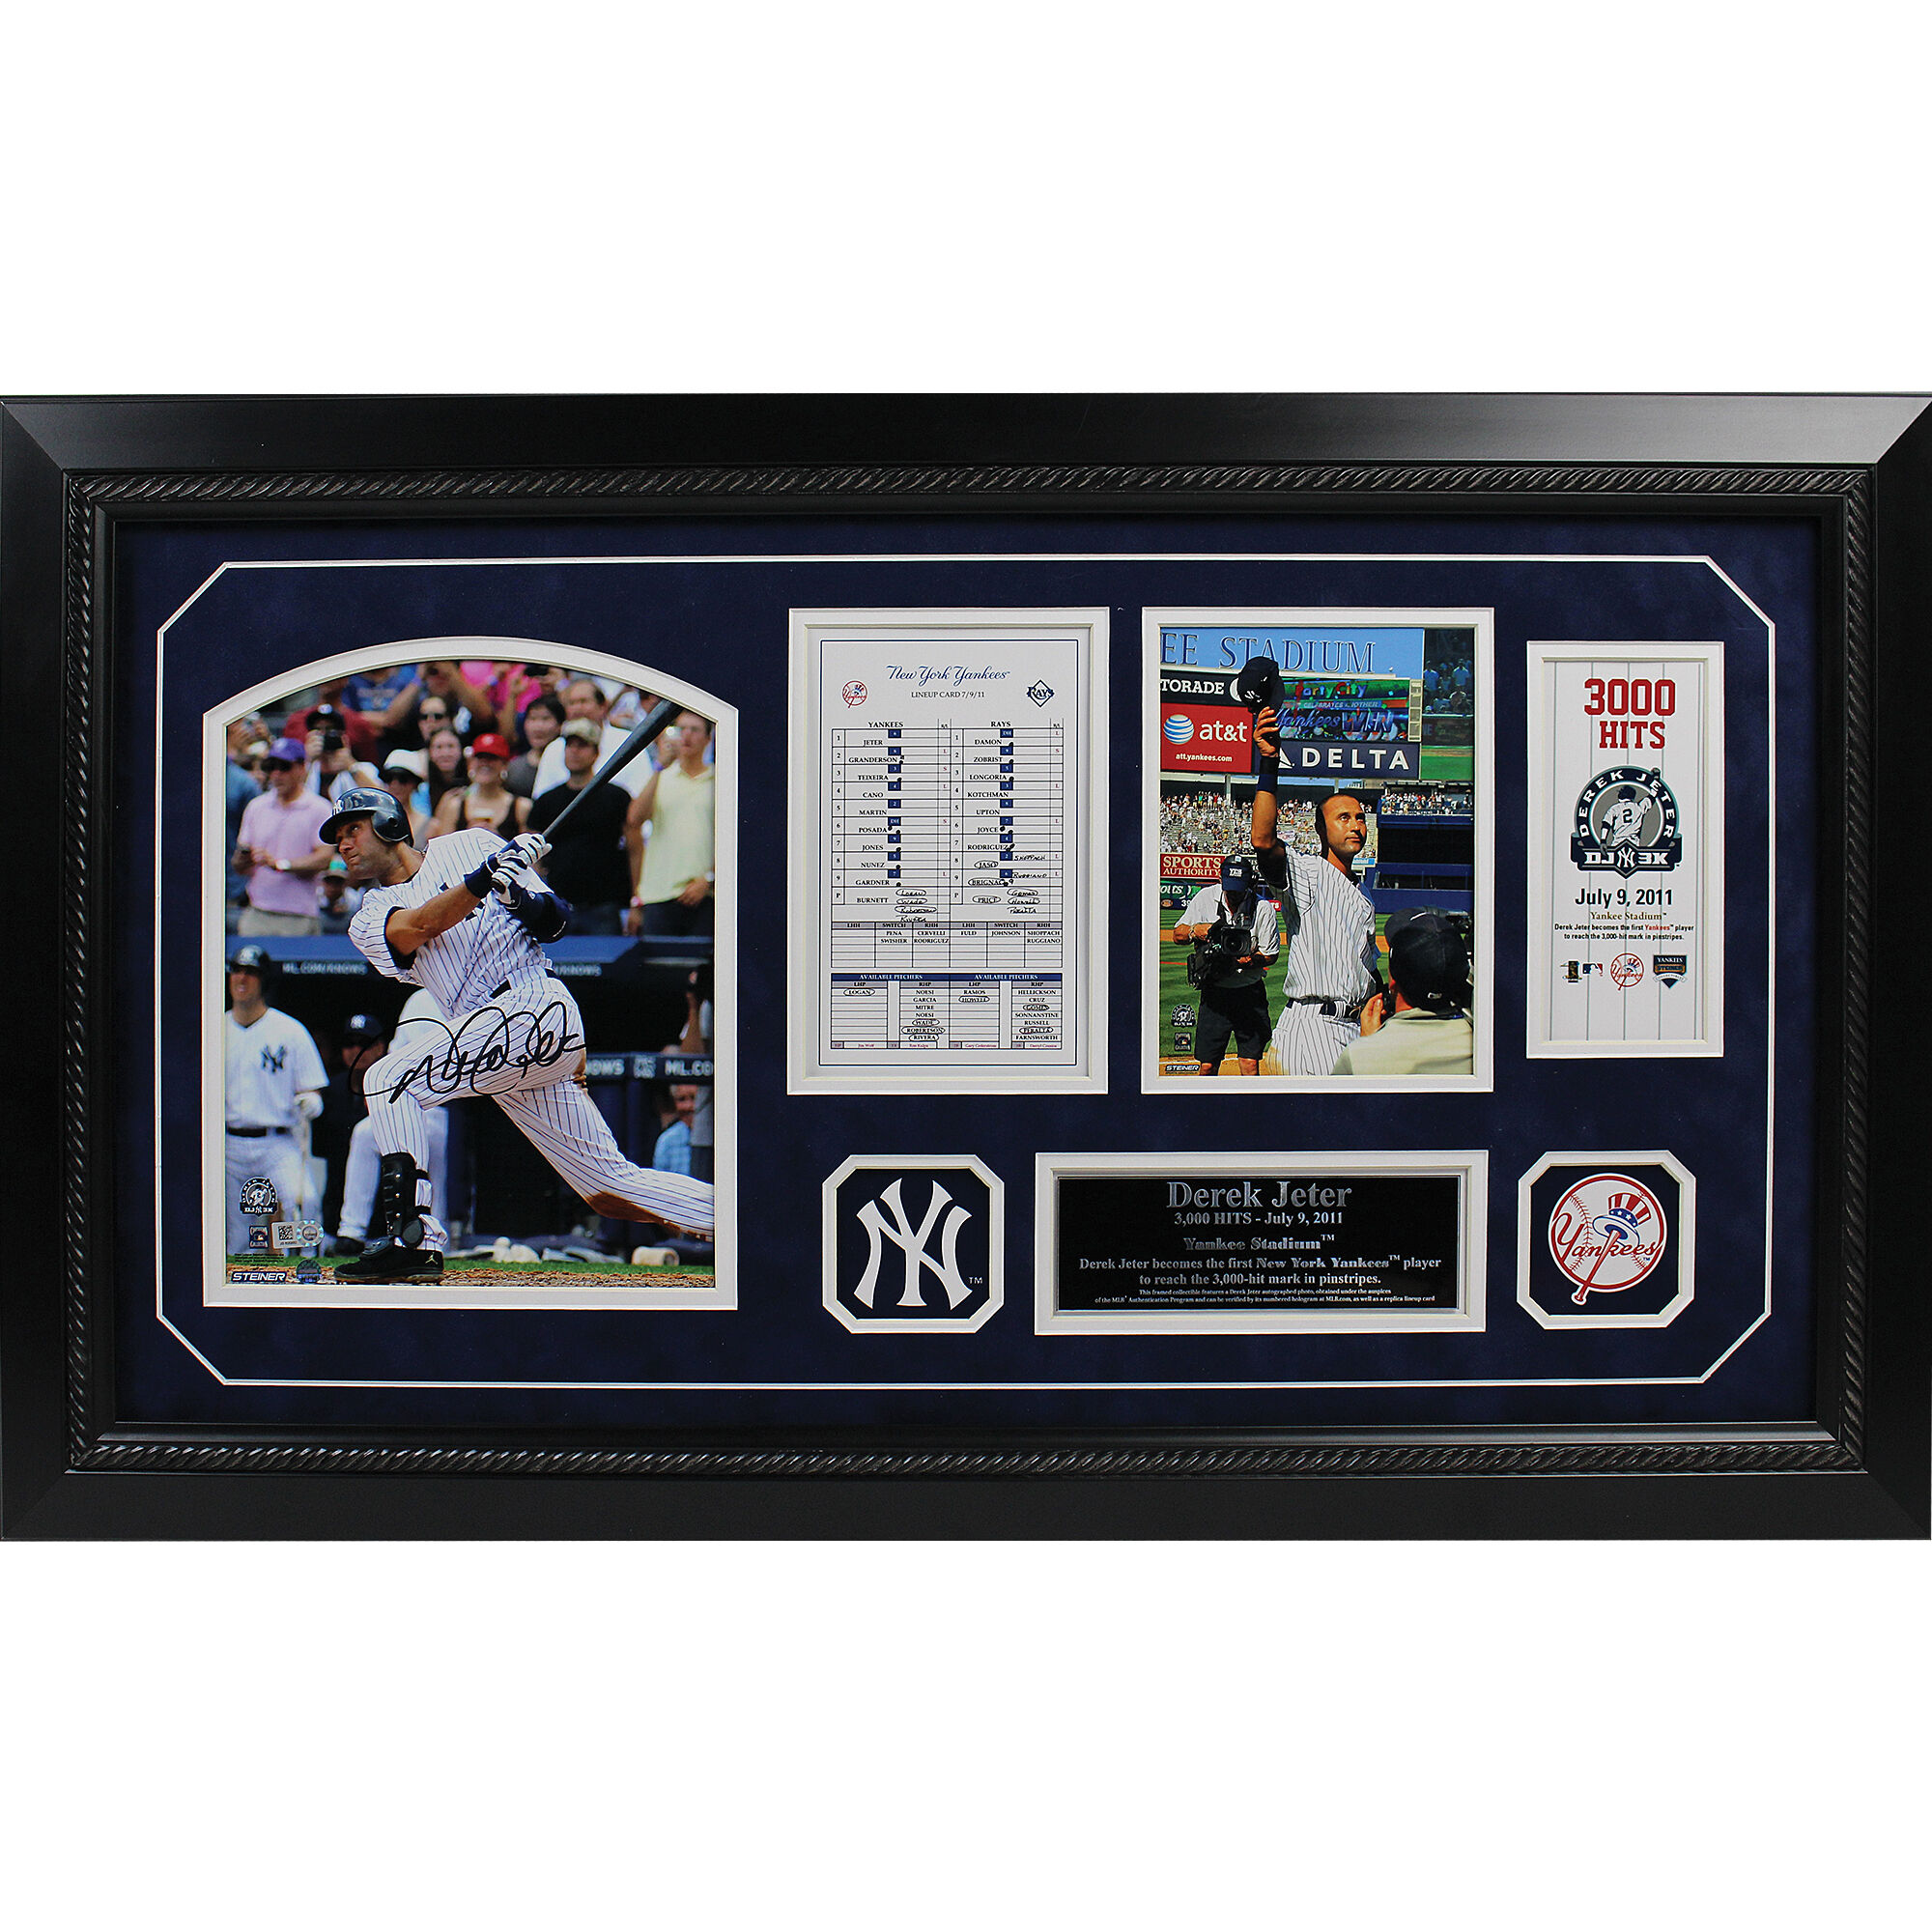 Derek Jeter Personally Signed 3000th Hit Framed Photo 4528 0328 a main